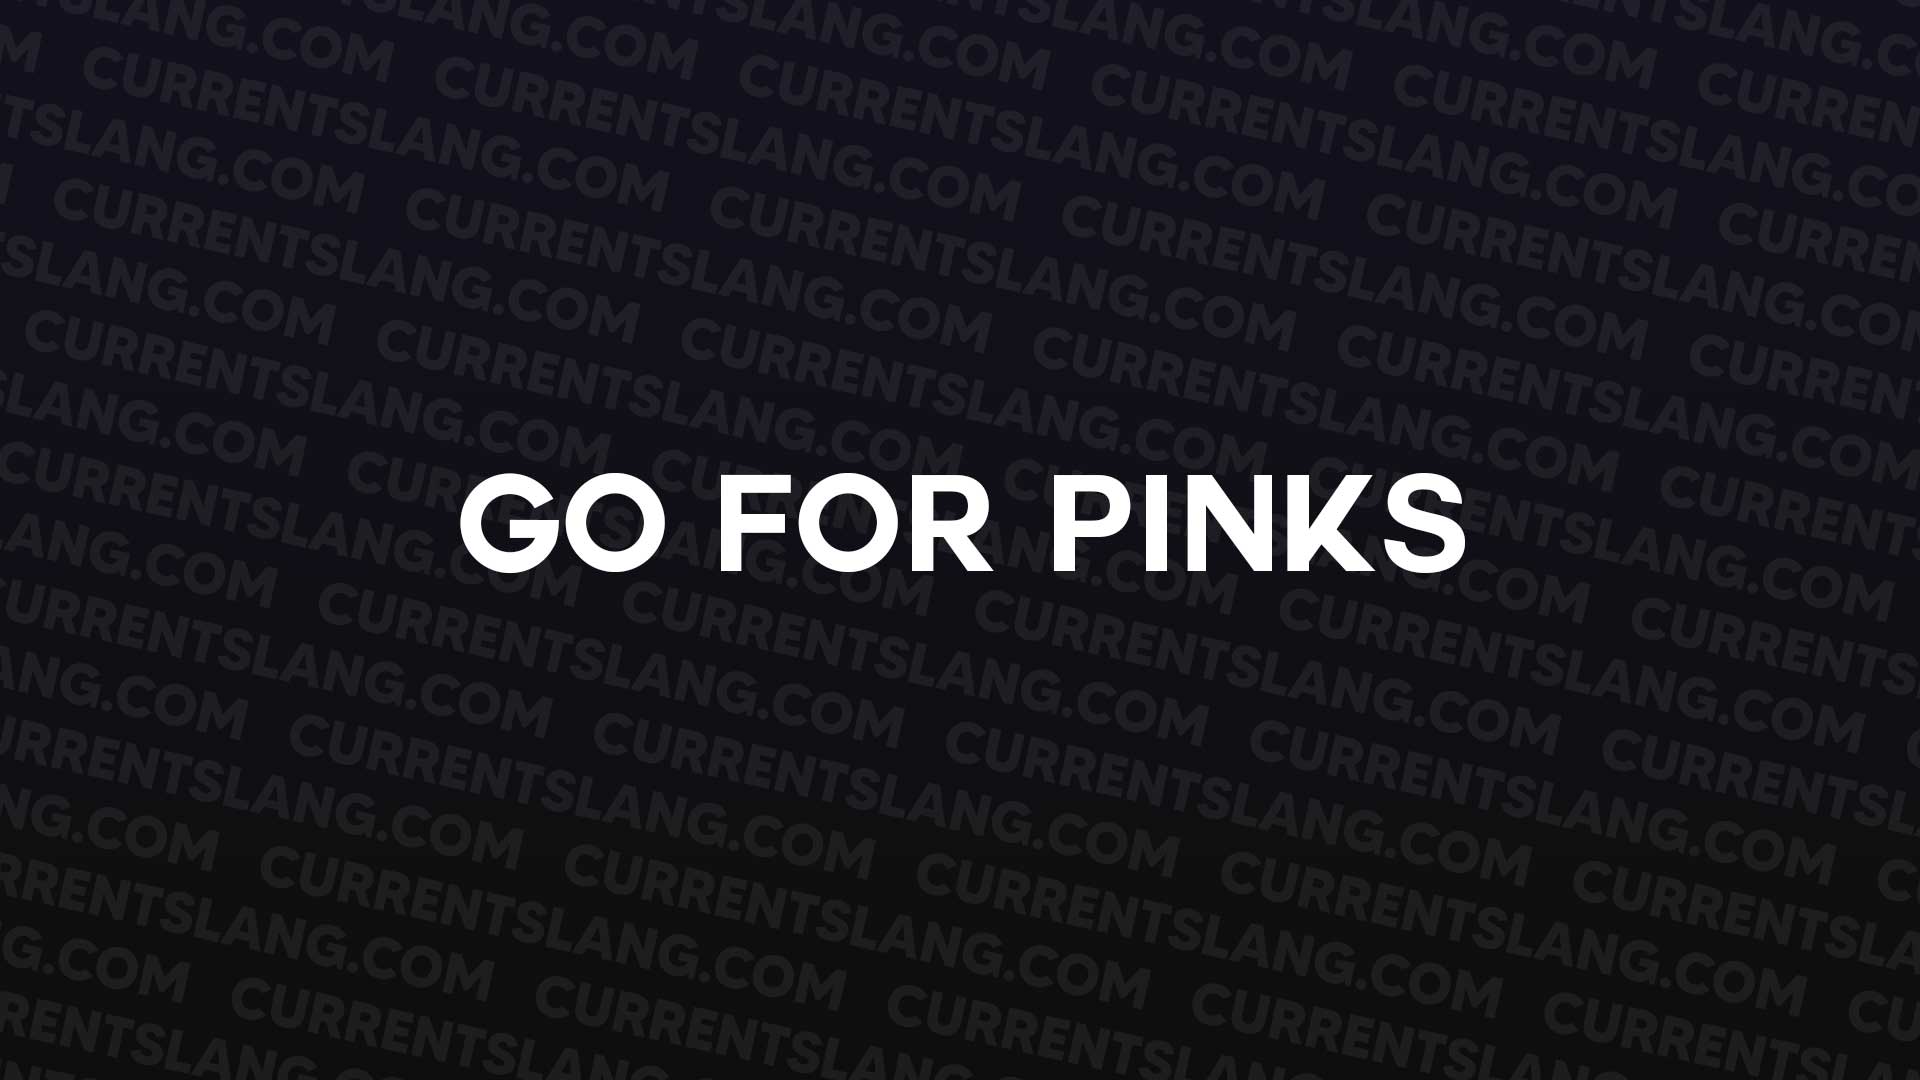 title image for Go for pinks